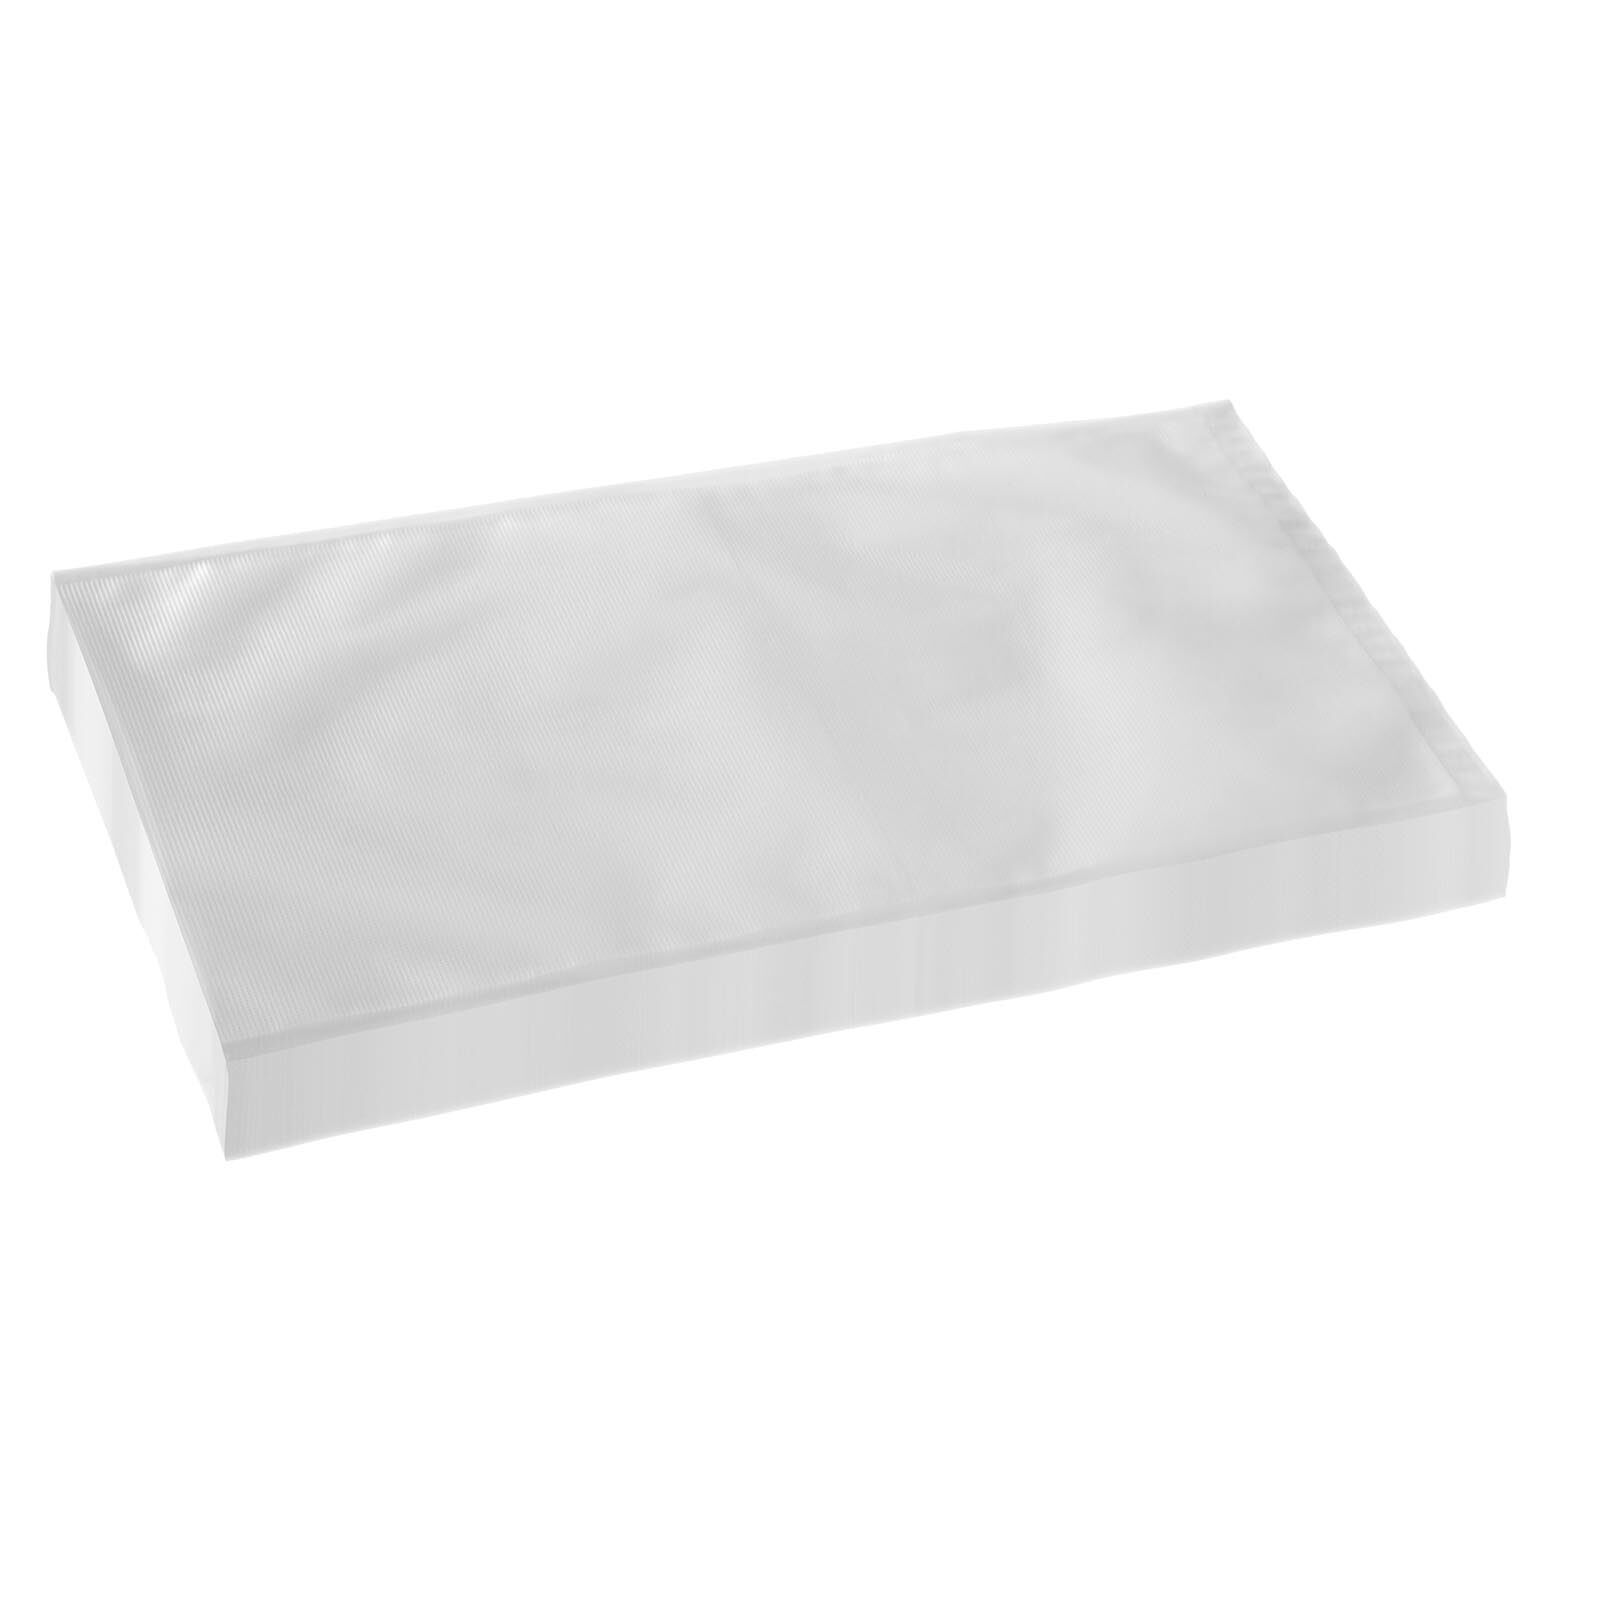 Royal Catering Vacuum Packaging Bags - 40 x 28 cm - 200 pieces RCVB-28X40-200